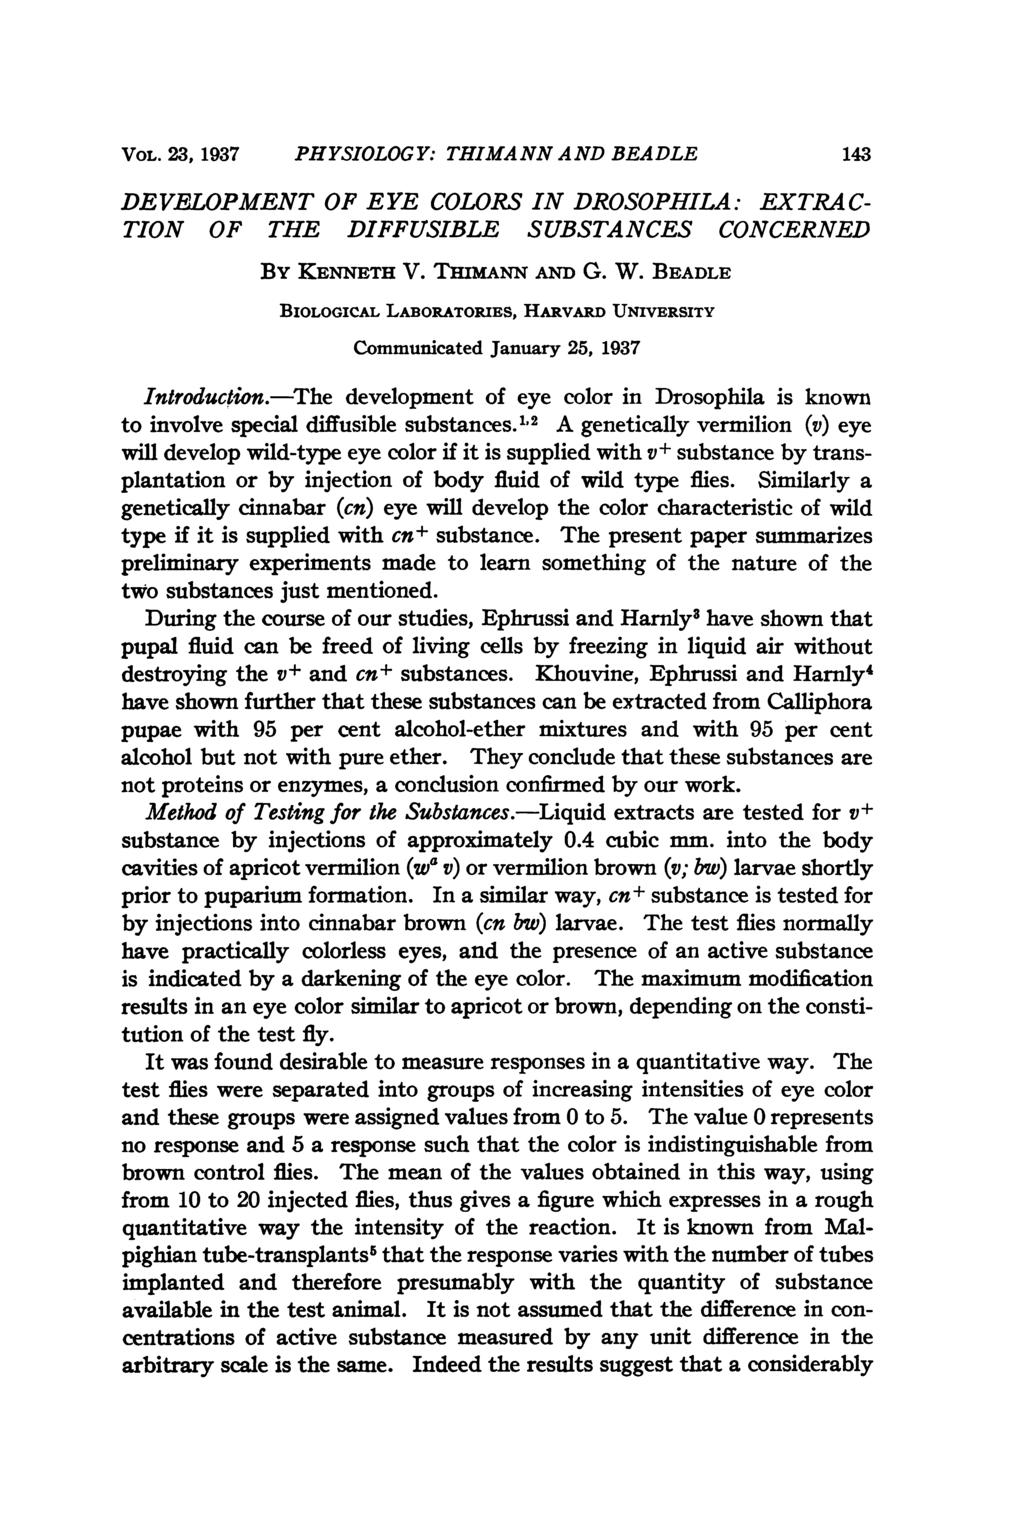 VOL. 23, 1937 PHYSIOLOGY: THIMANN AND BEADLE DEVE)LOPMENT OF EYE COLORS IN DROSOPHILA: EXTRA C- TION OF THE DIFFUSIBLE SUBSTANCES CONCERNED By KENNETH V. THIMANN AND G. W.